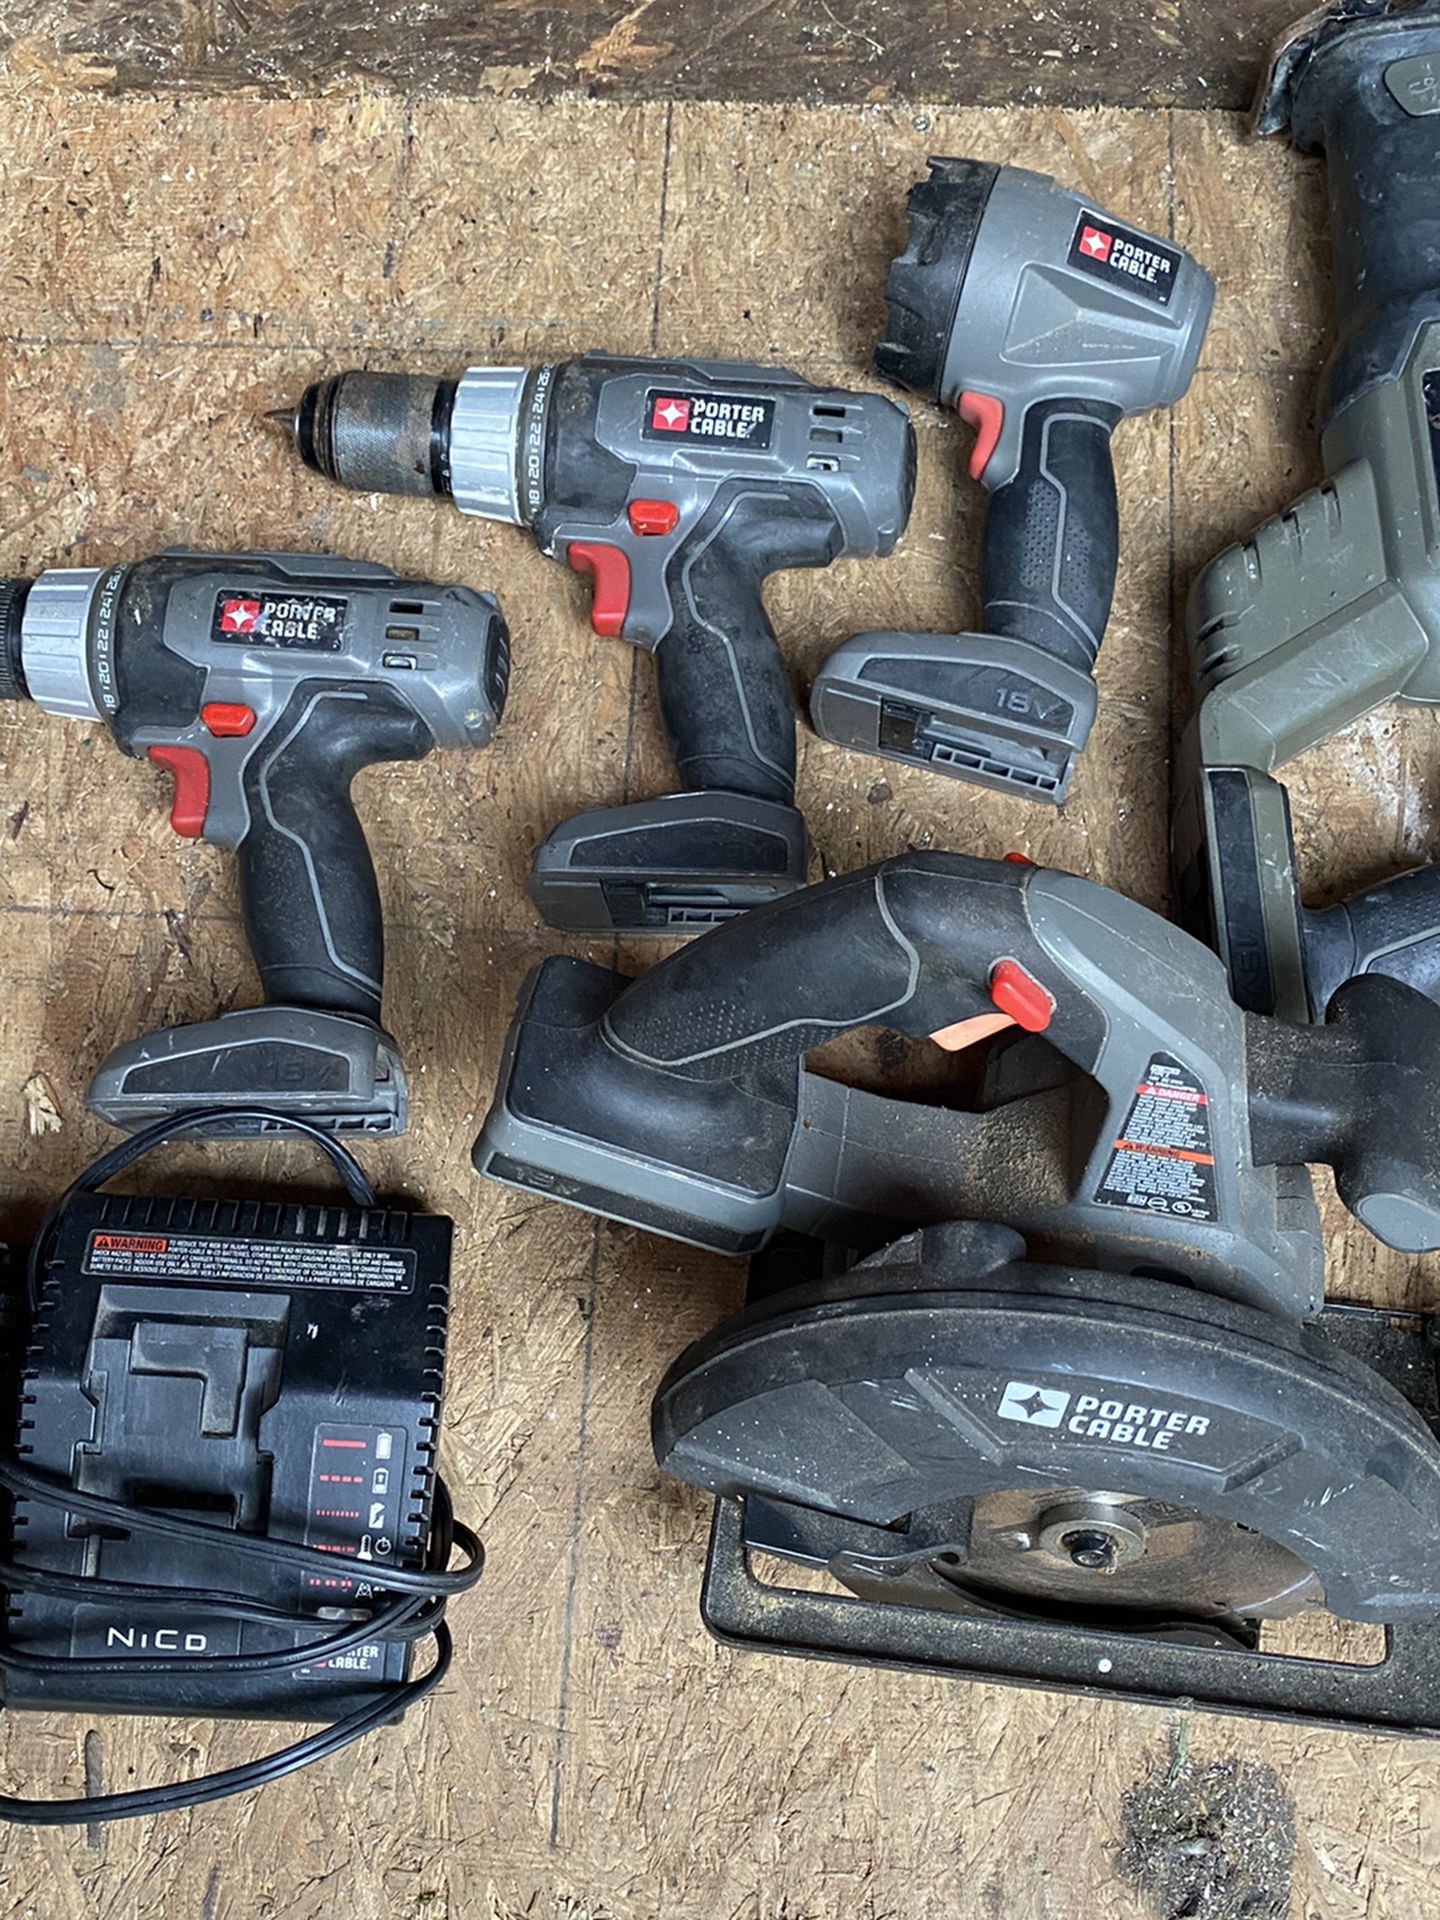 18v Porter Cable Tools